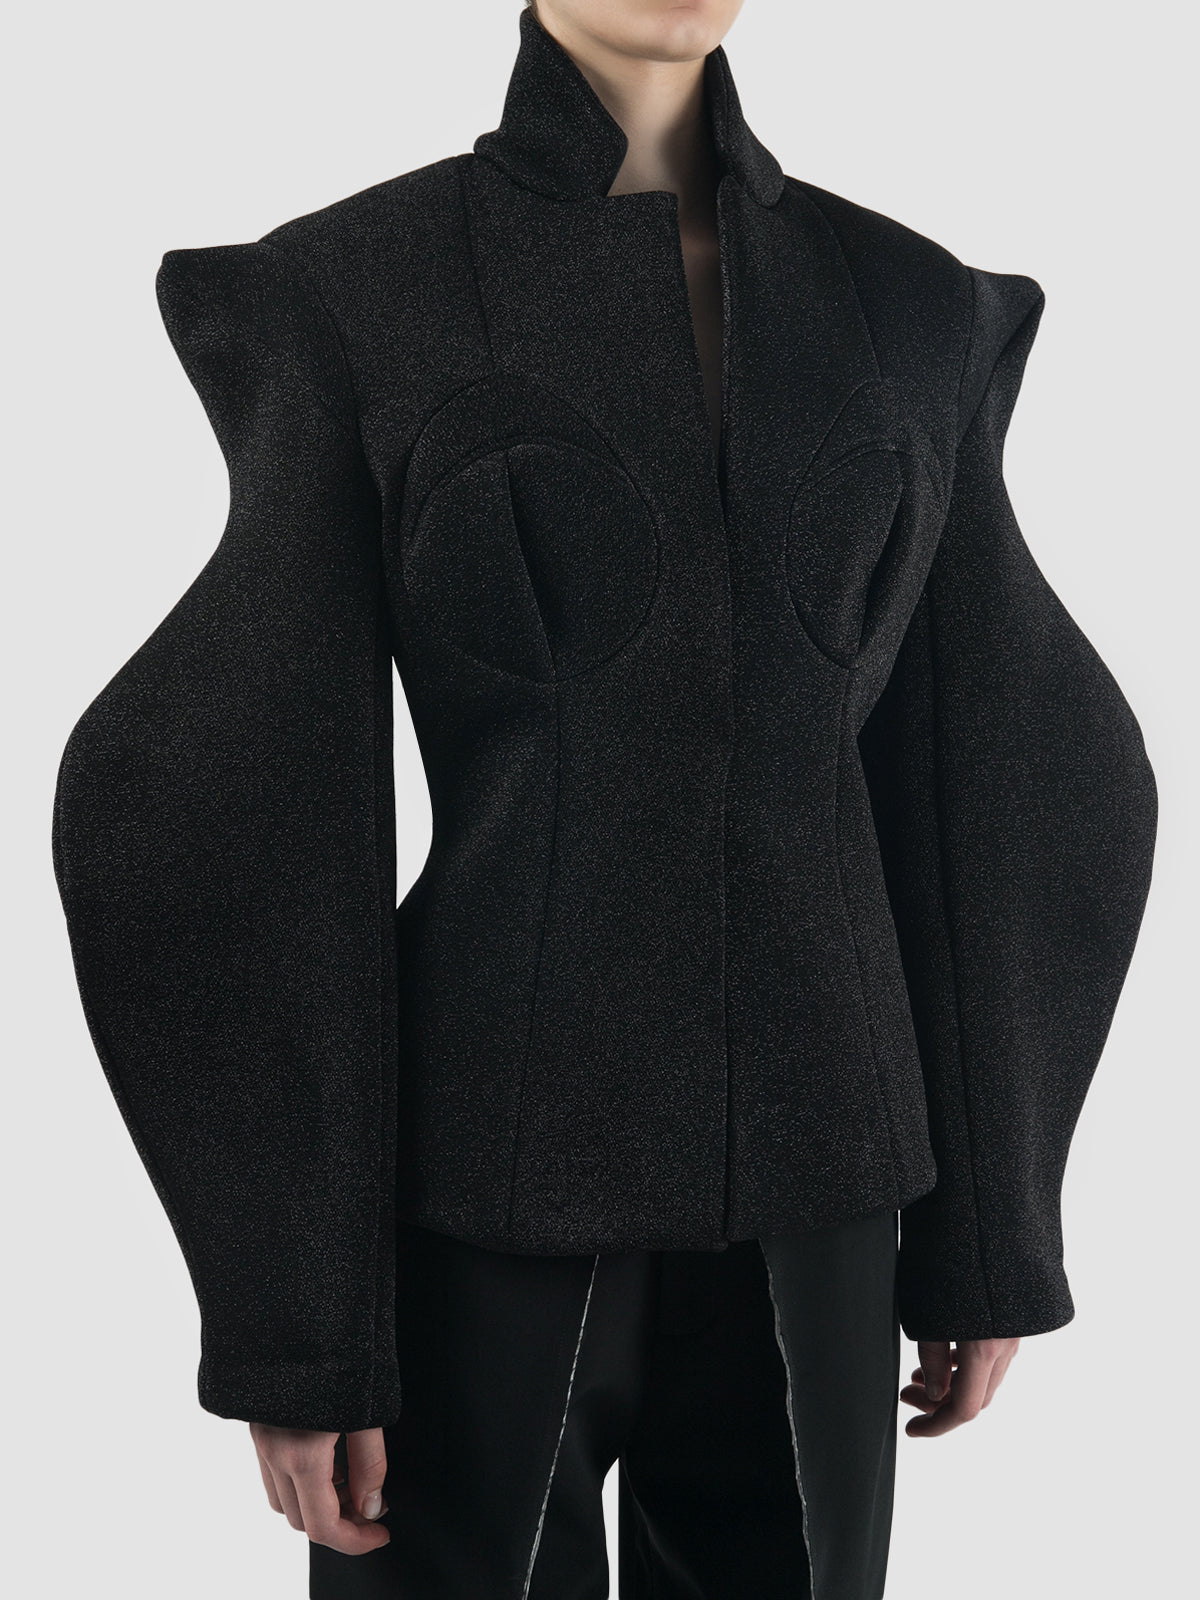 Black tailored neoprene suit with abstract long sleeves